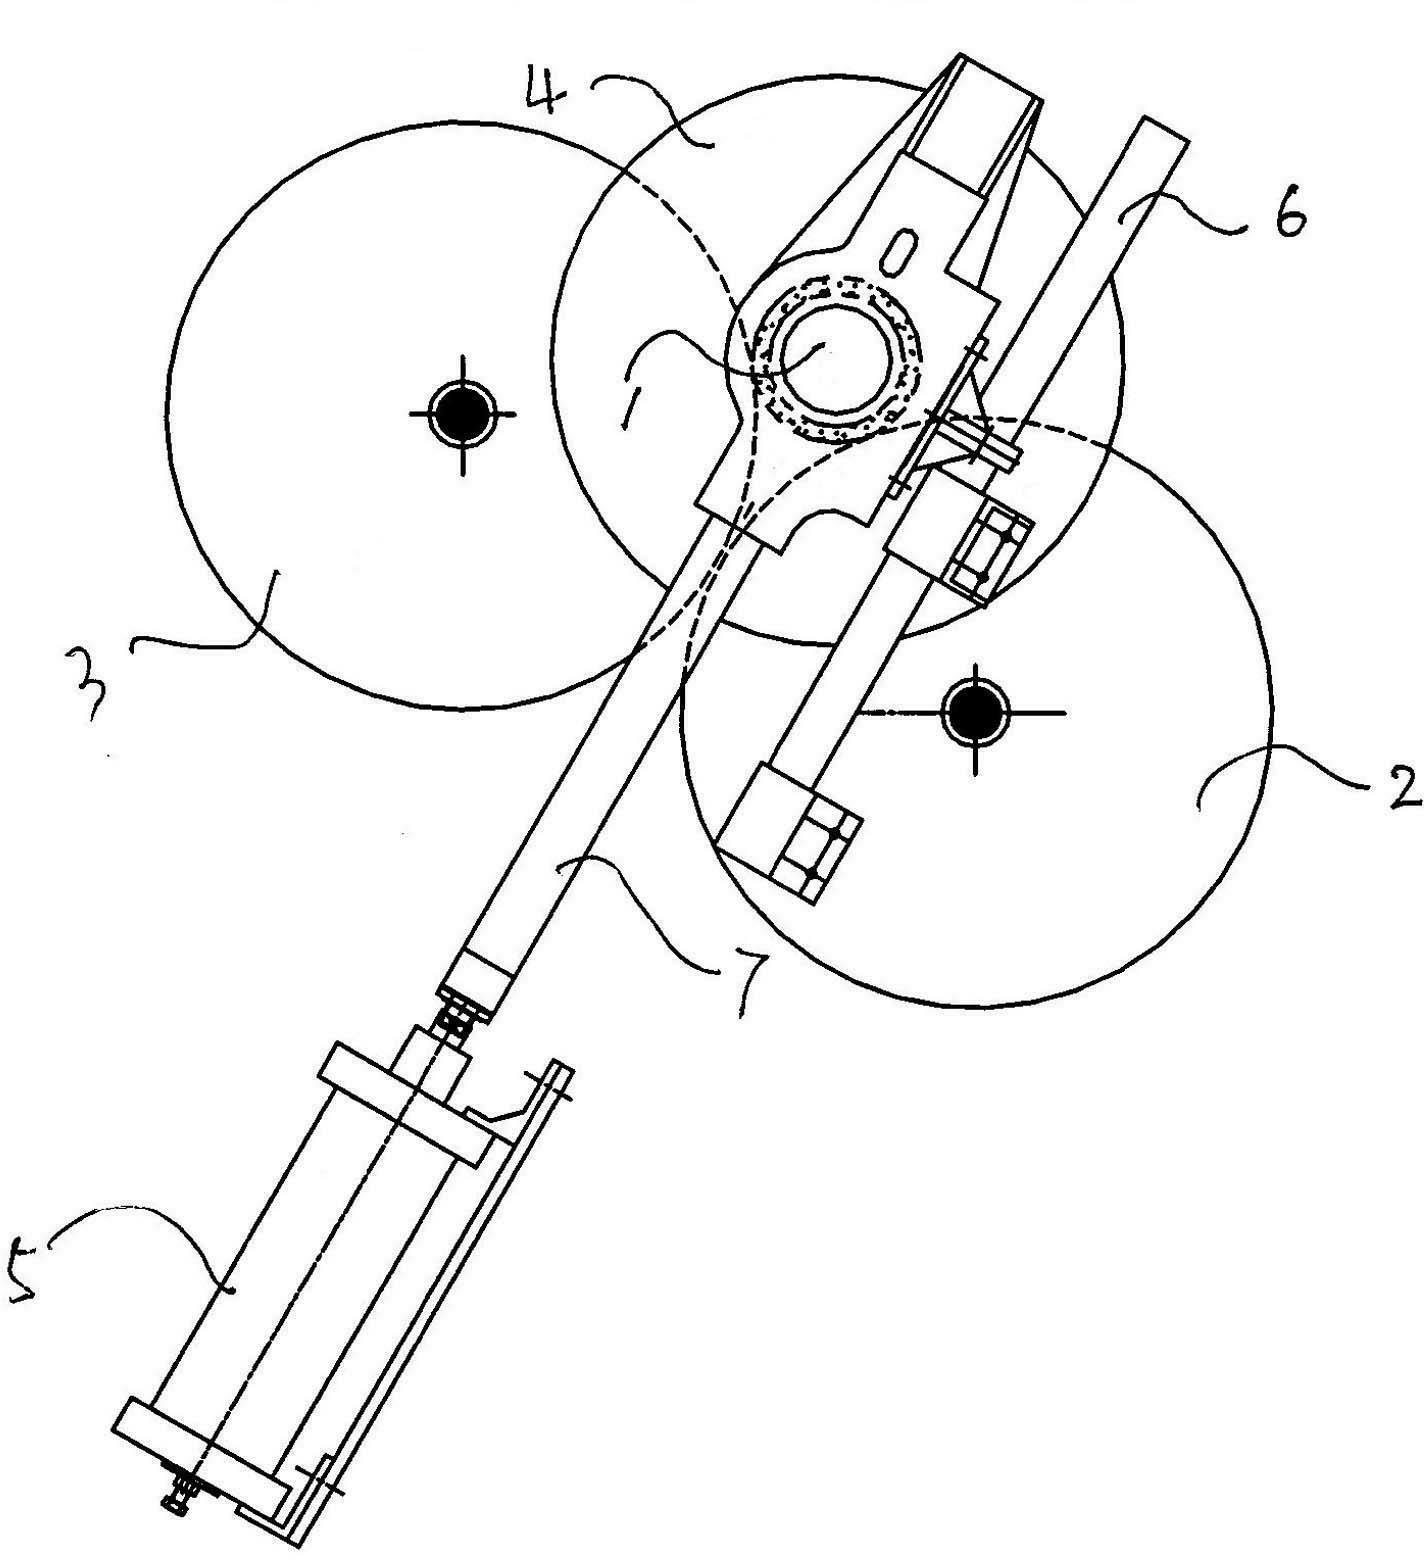 Single-cylinder pressure device applicable to cotton lap pressure of strip and lap combination machine